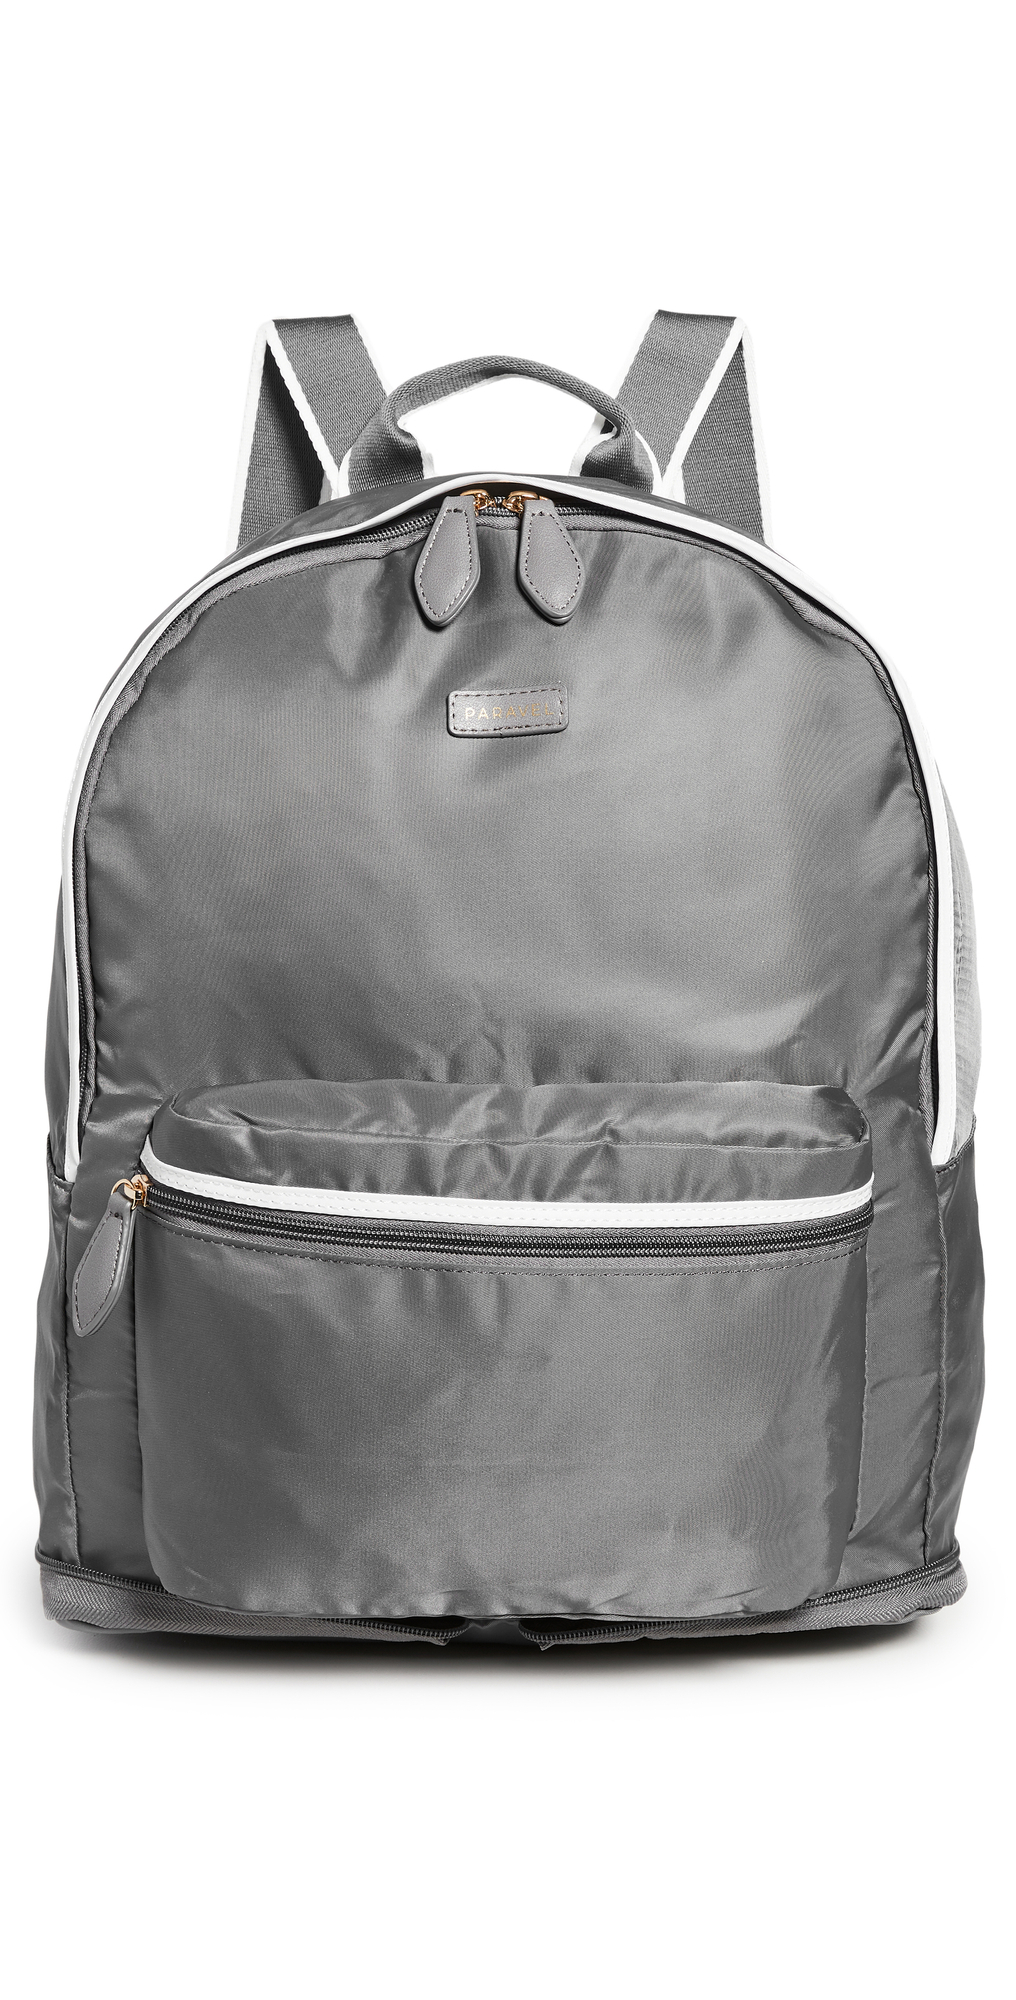 Paravel Fold Up Backpack in grey